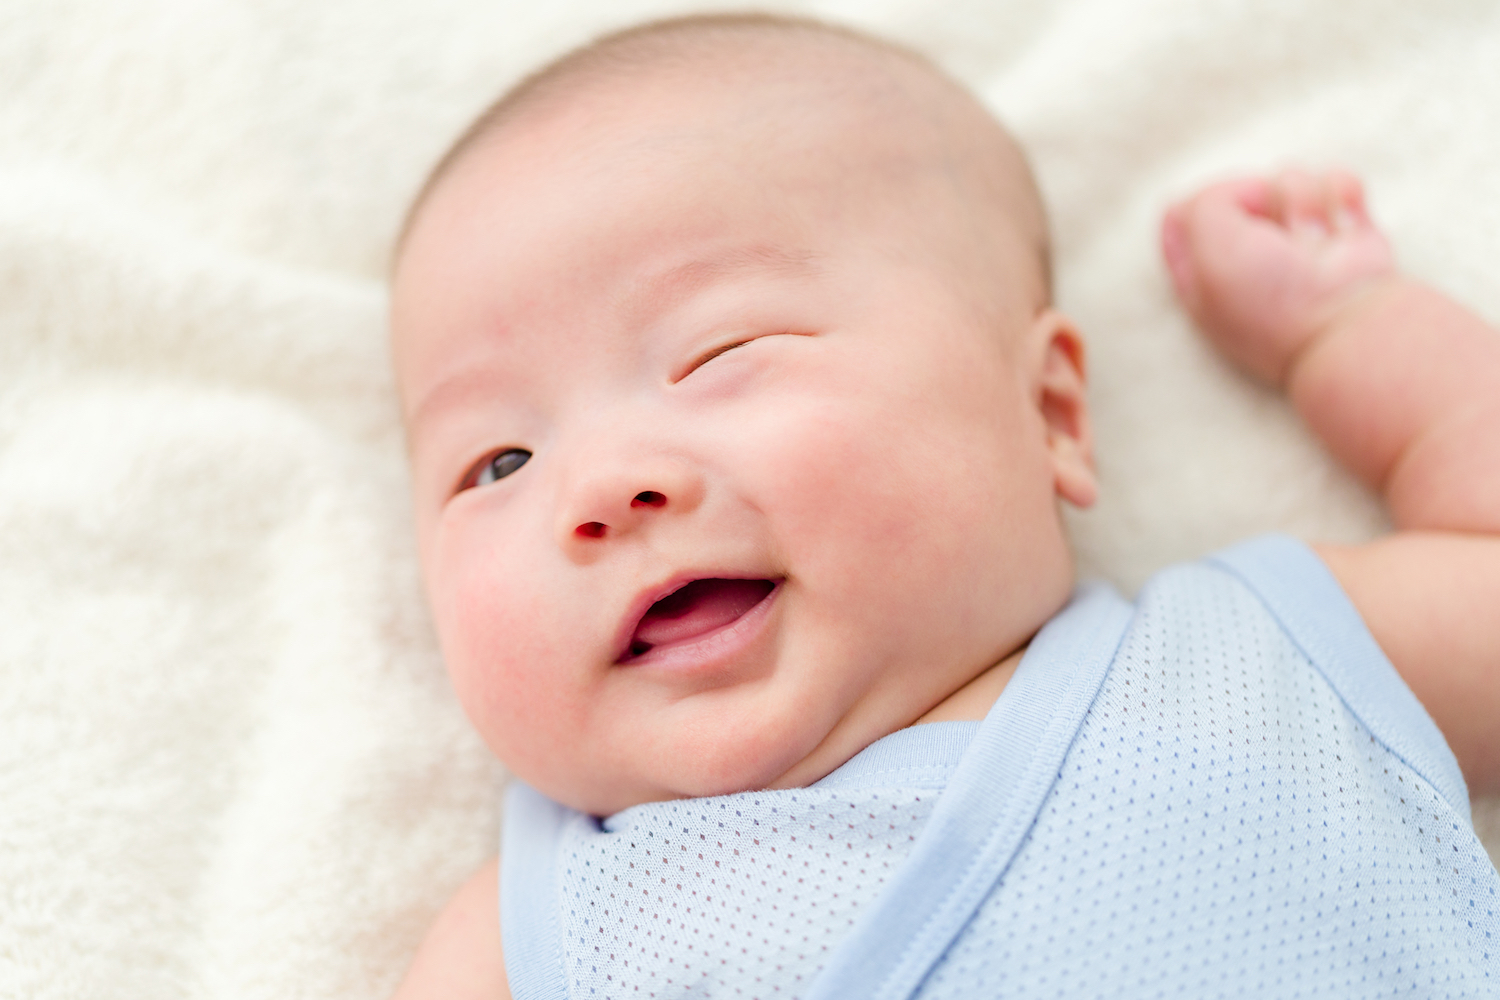 Why Do Babies And Infants Develop An Attachment?